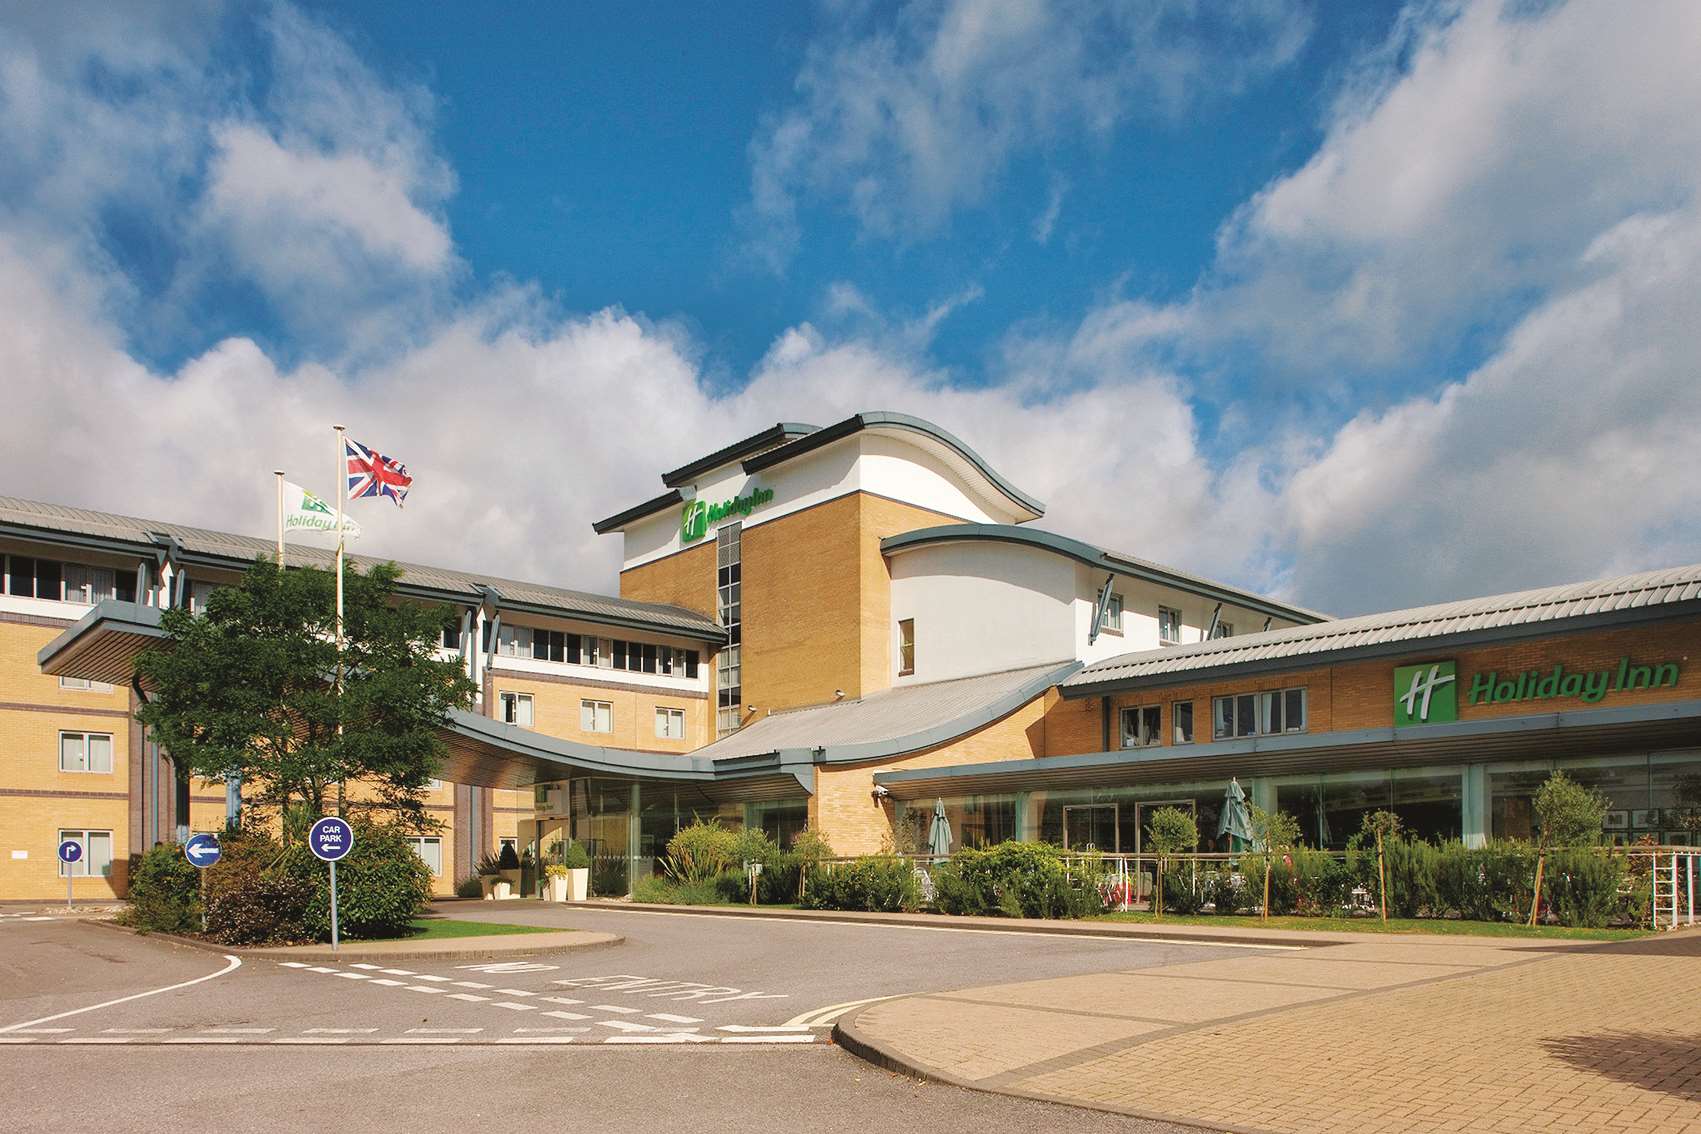 The Holiday Inn on Maidstone Road, near Rochester Airport